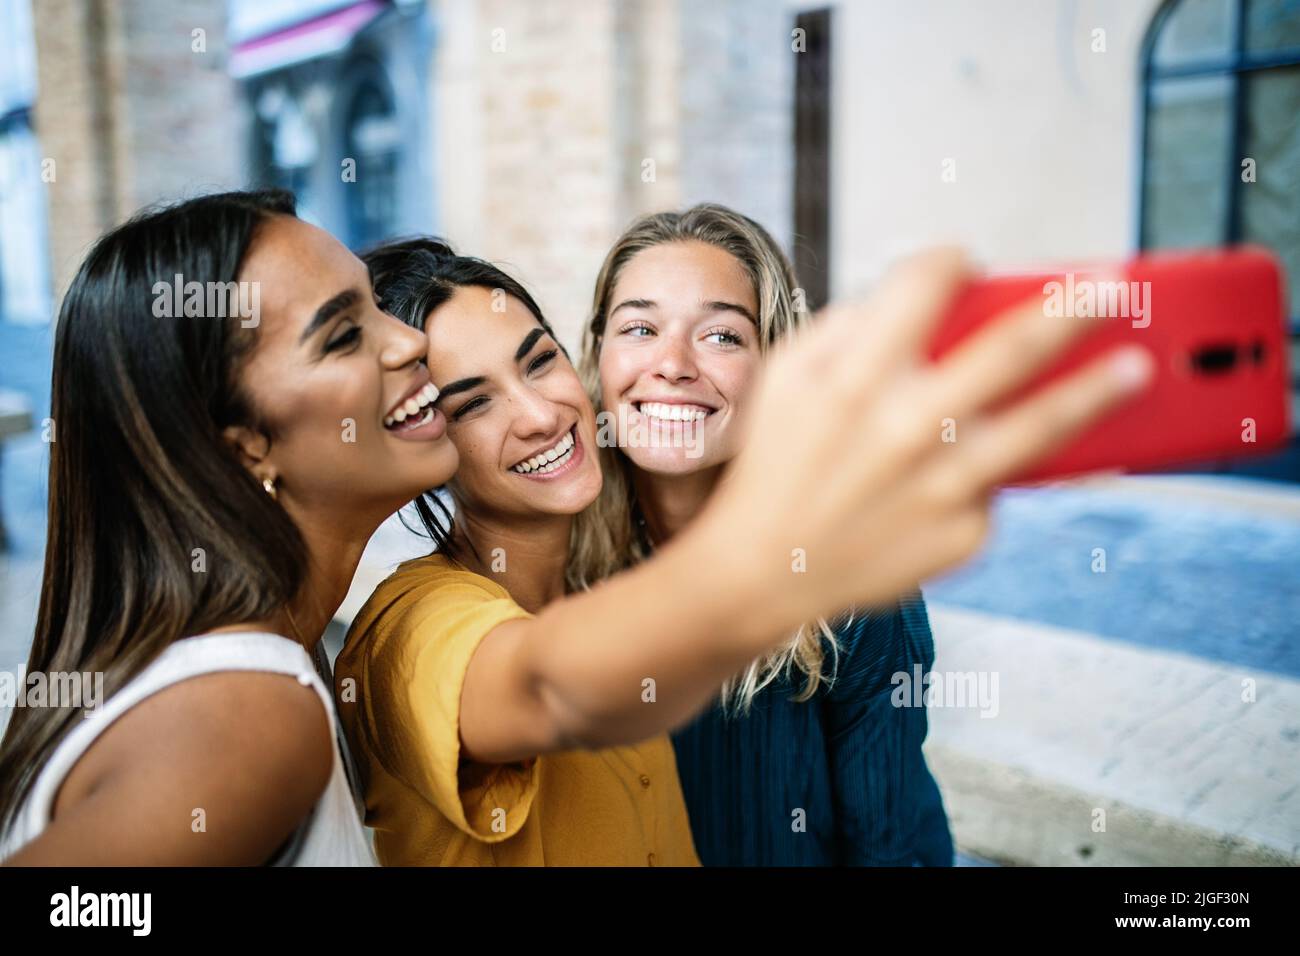 Young happy woman friends of different ethnicities having fun taking selfie Stock Photo